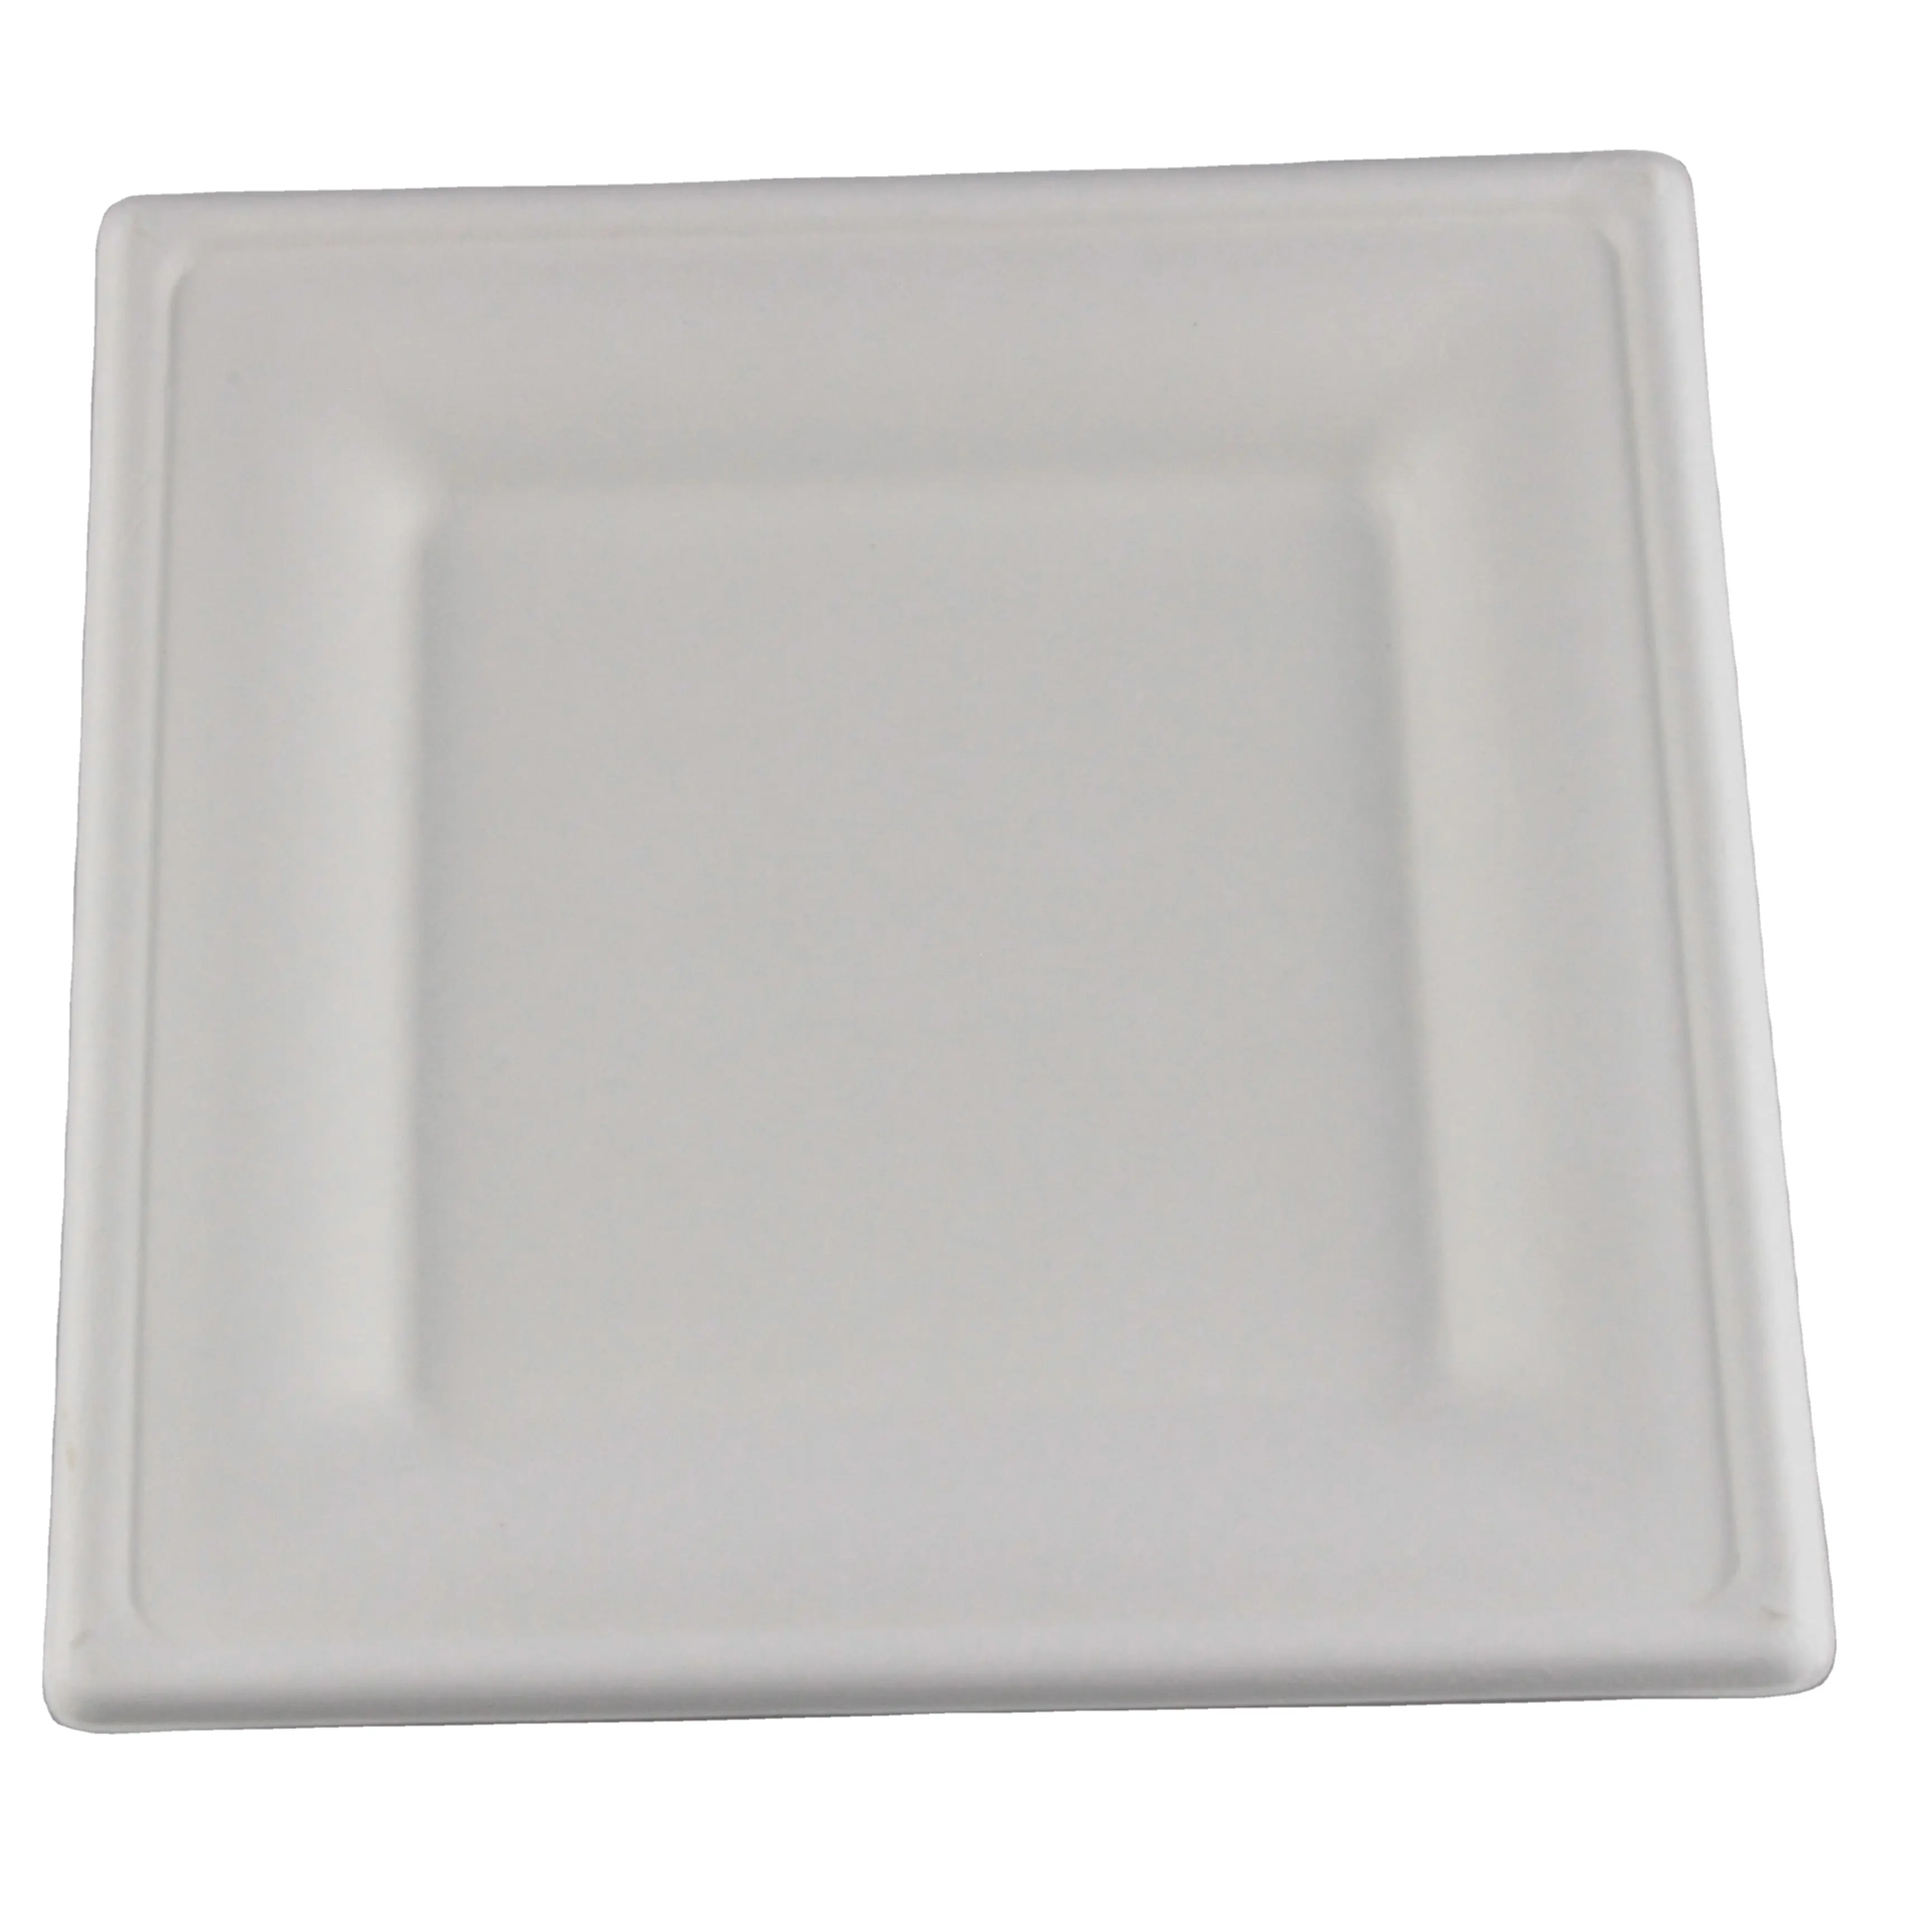 Wholesale high quality rectangle square disposable paper dishes sugarcane bagasse food container biodegradable plates